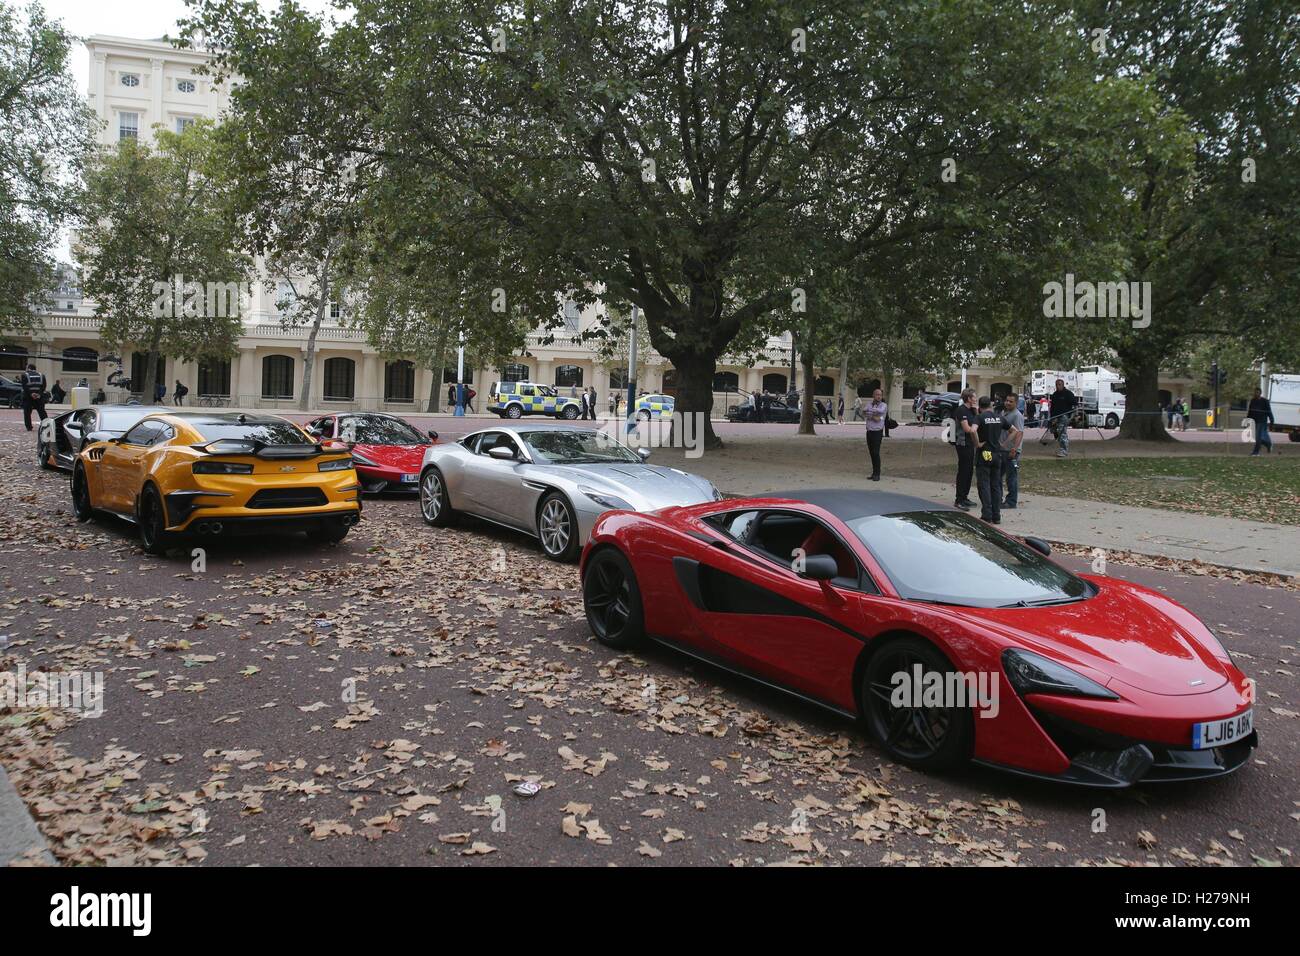 A Chevrolet Camaro (left in yellow), Aston Martin DB11 (centre in silver) and a McLaren (right in red) sports car during filming of the film Transformers: The Last Knight, on The Mall in London. Stock Photo